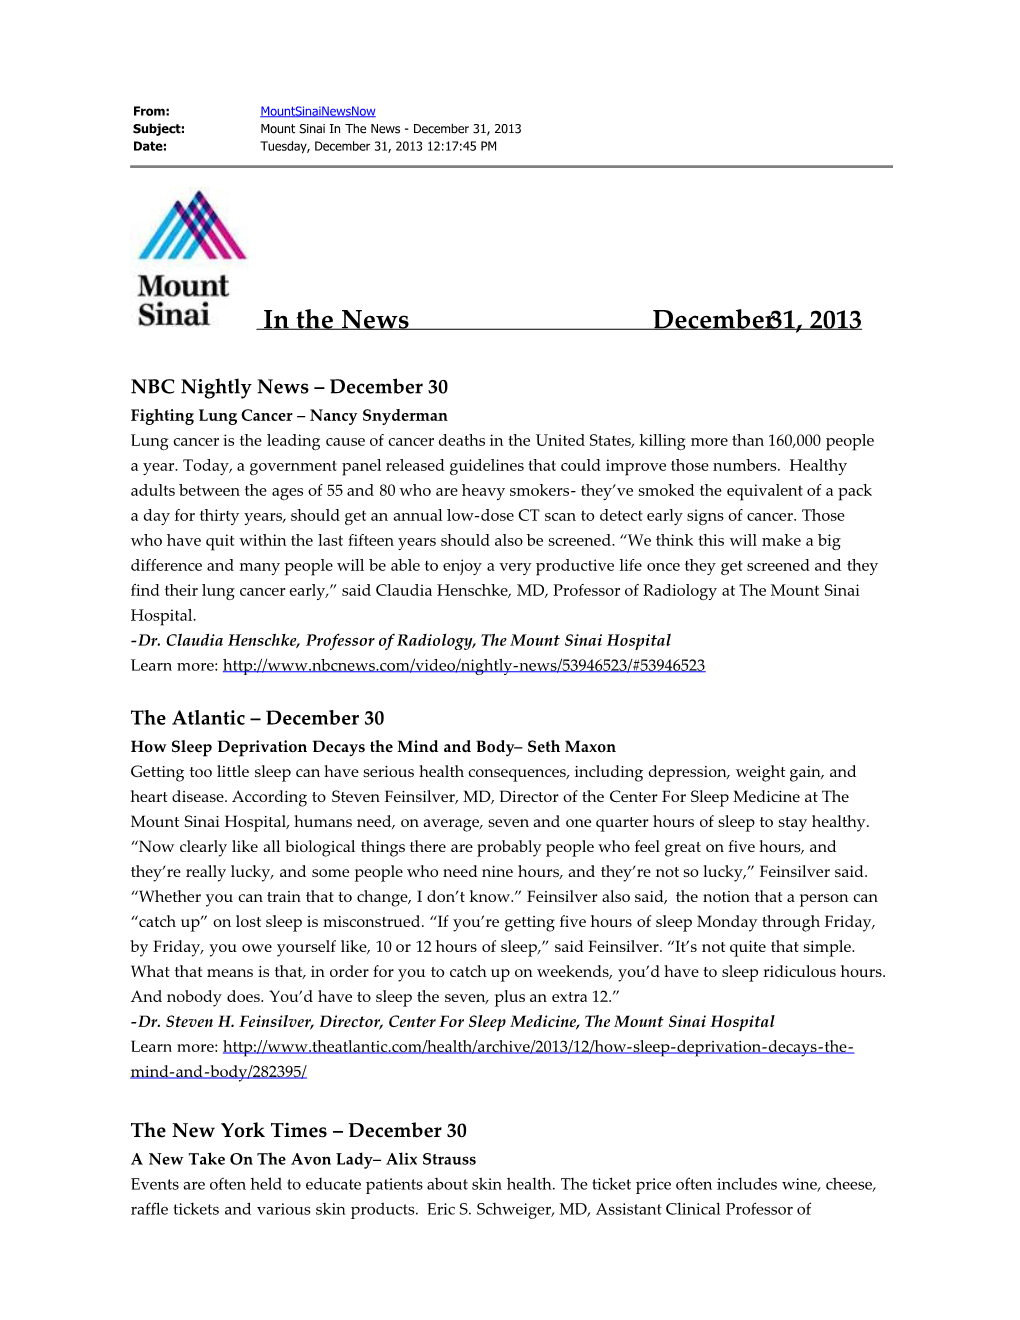 In the News December 31, 2013